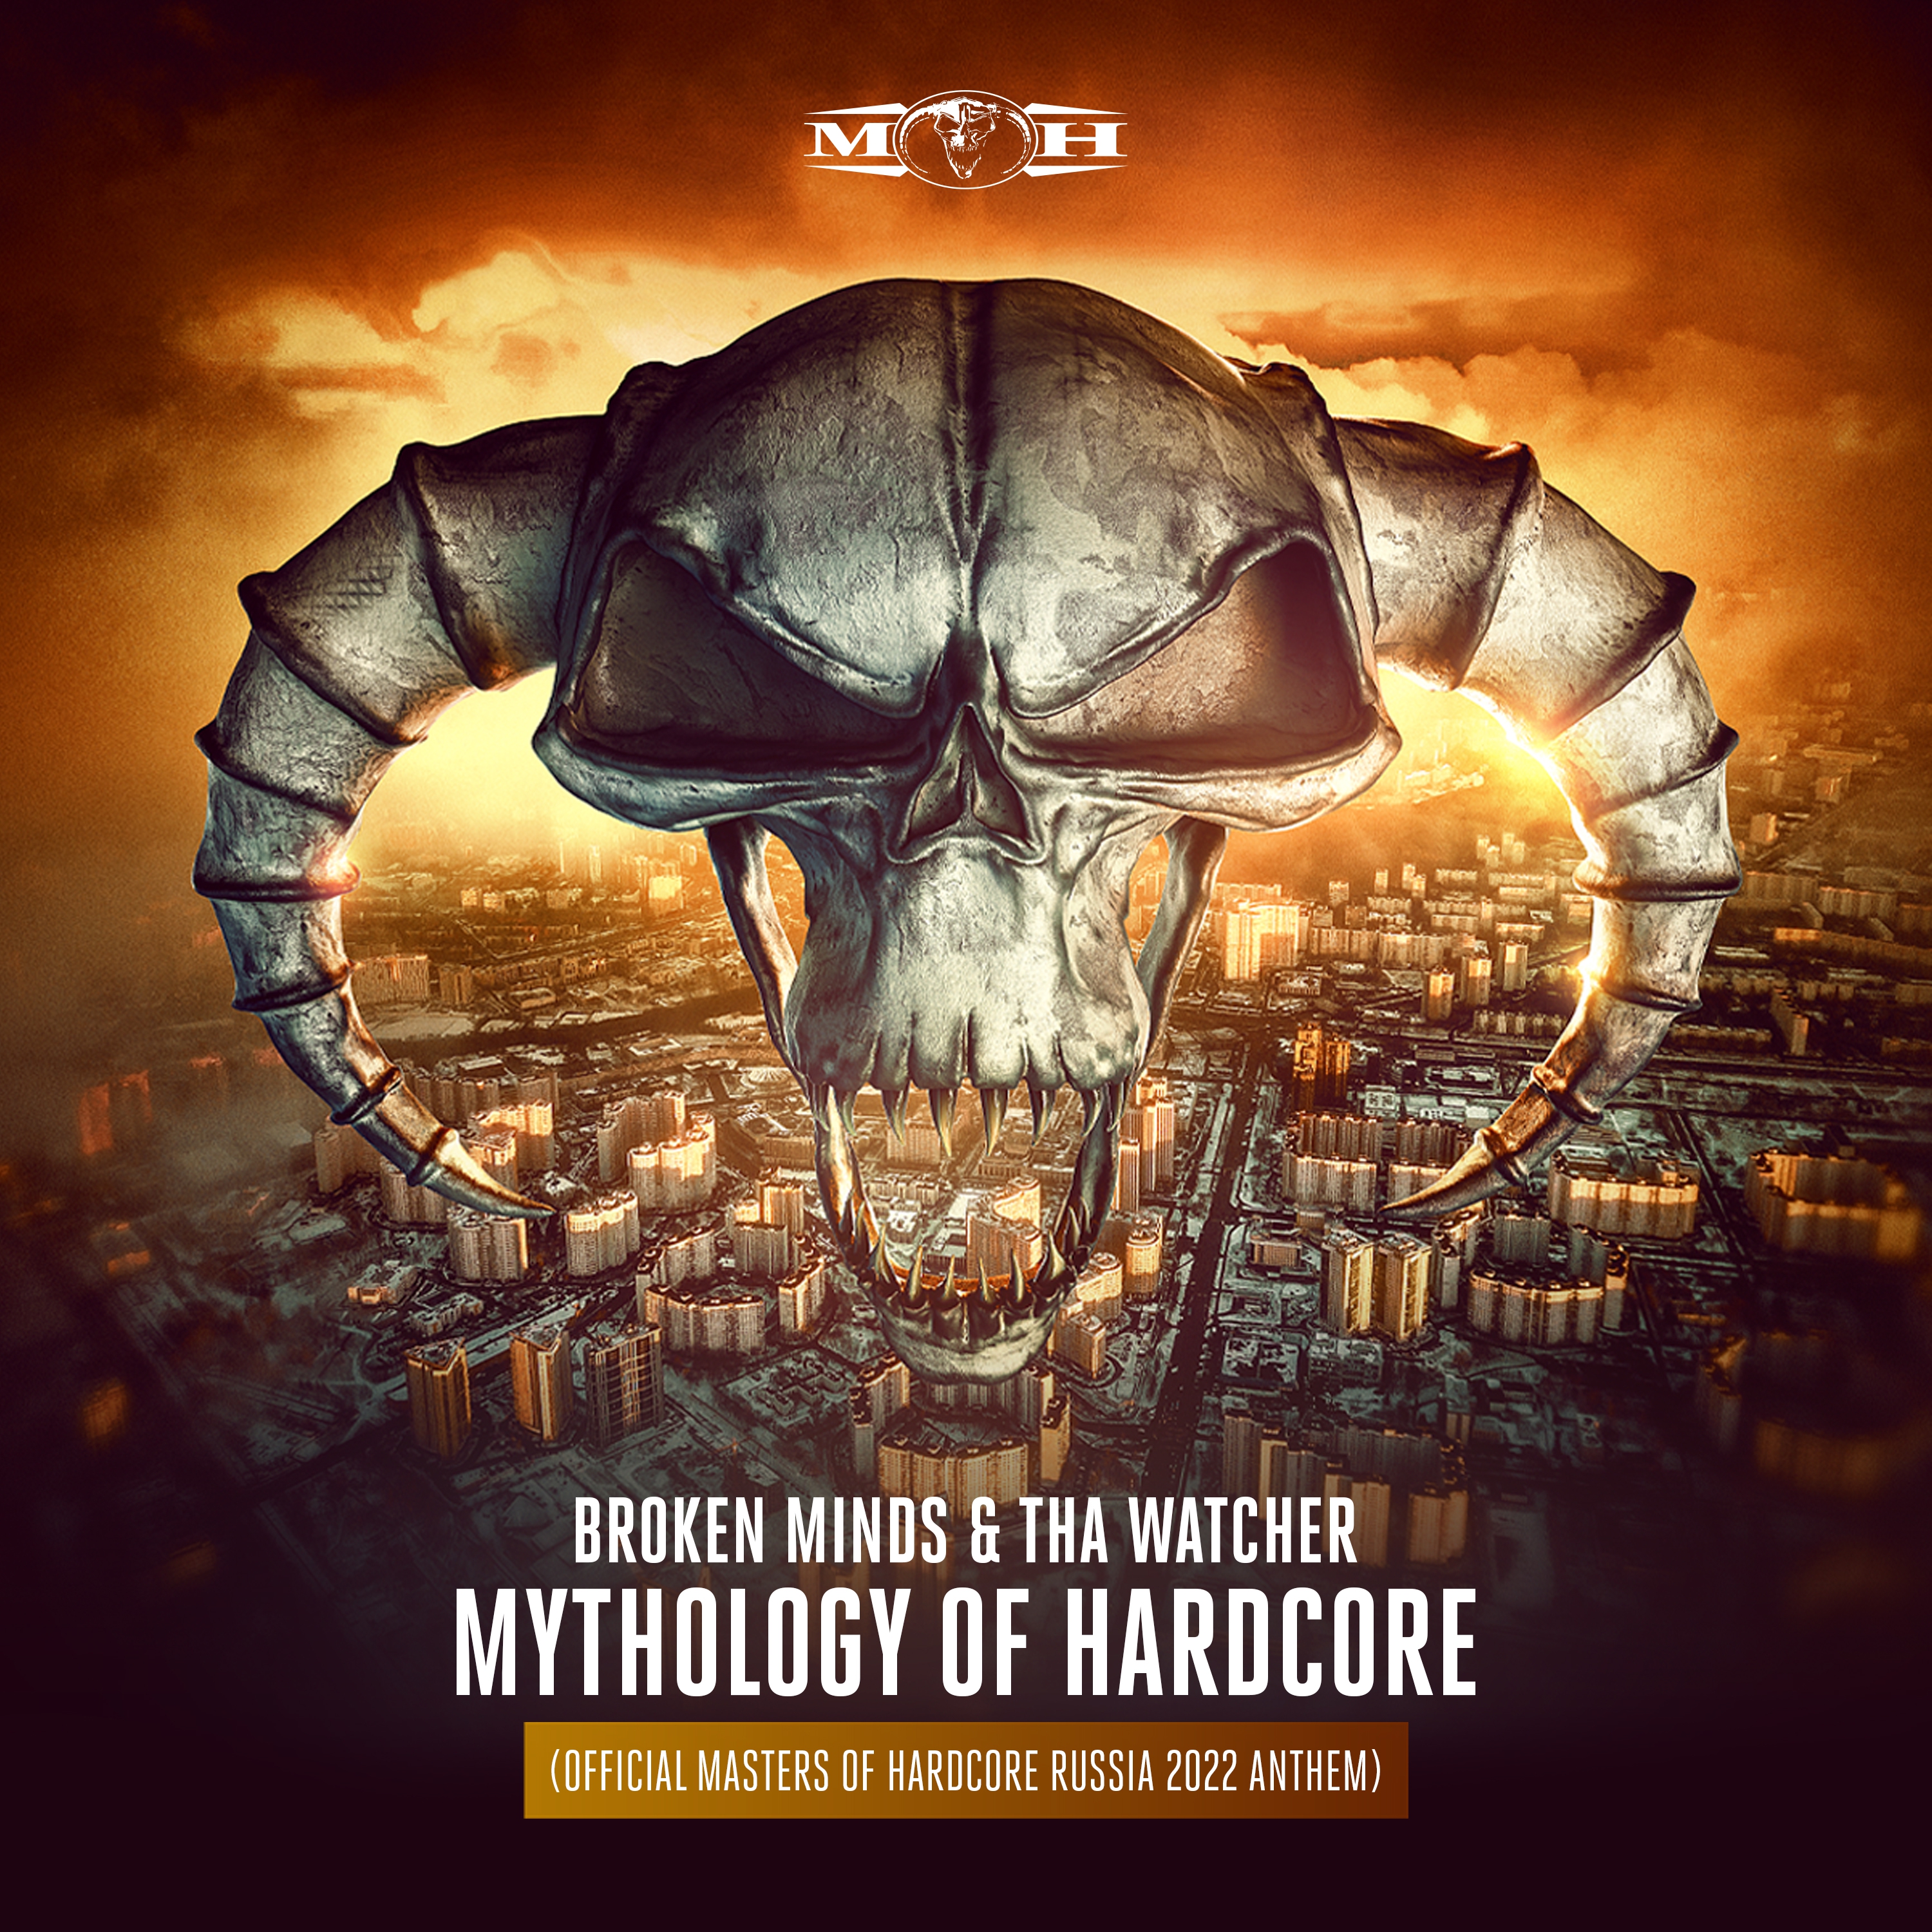 Broken Minds & Tha Watcher - Mythology of Hardcore (Official Masters of  Hardcore Russia 2022 Anthem) (Radio Edit) - MP3 and WAV downloads at  Hardtunes